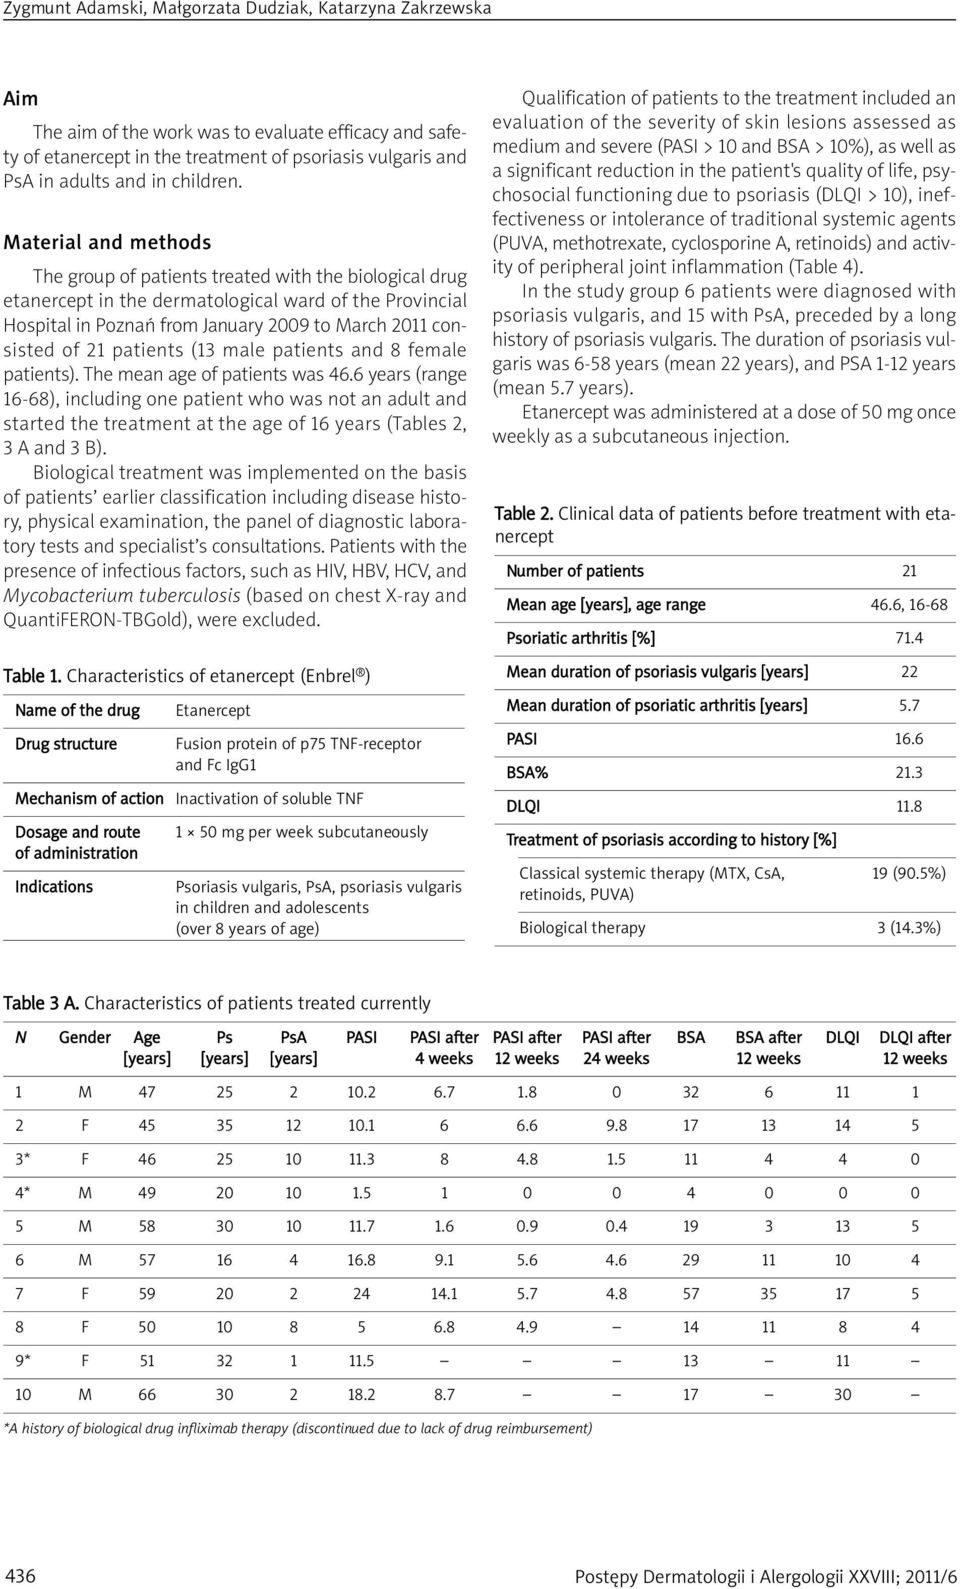 Material and methods The group of patients treated with the biological drug etanercept in the dermatological ward of the Provincial Hospital in Poznań from January 2009 to March 2011 consisted of 21